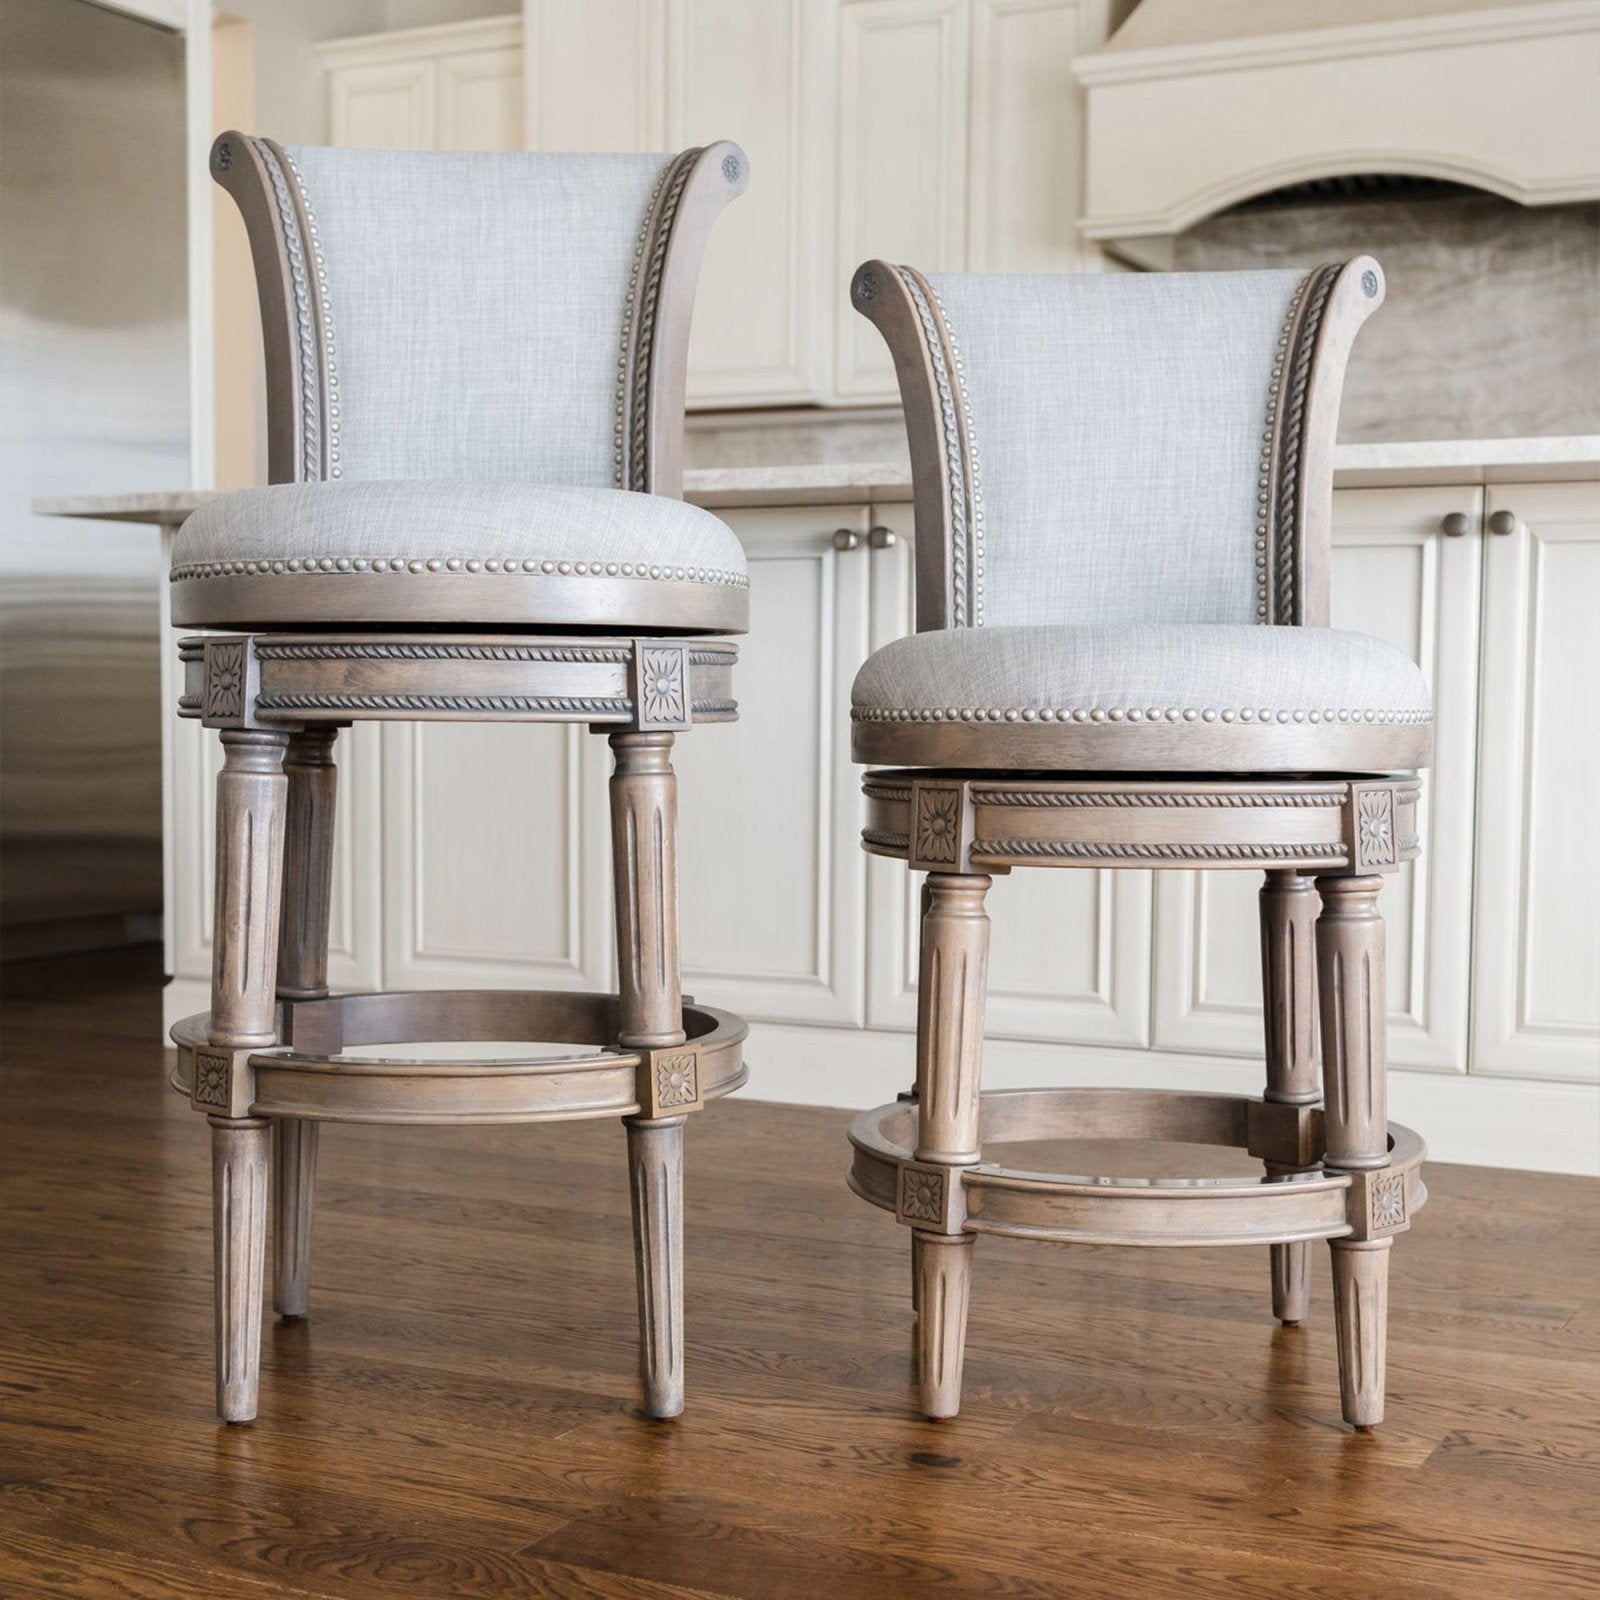 Pullman Bar Stool in Reclaimed Oak Finish with Ash Grey Fabric Upholstery in Stools by Maven Lane